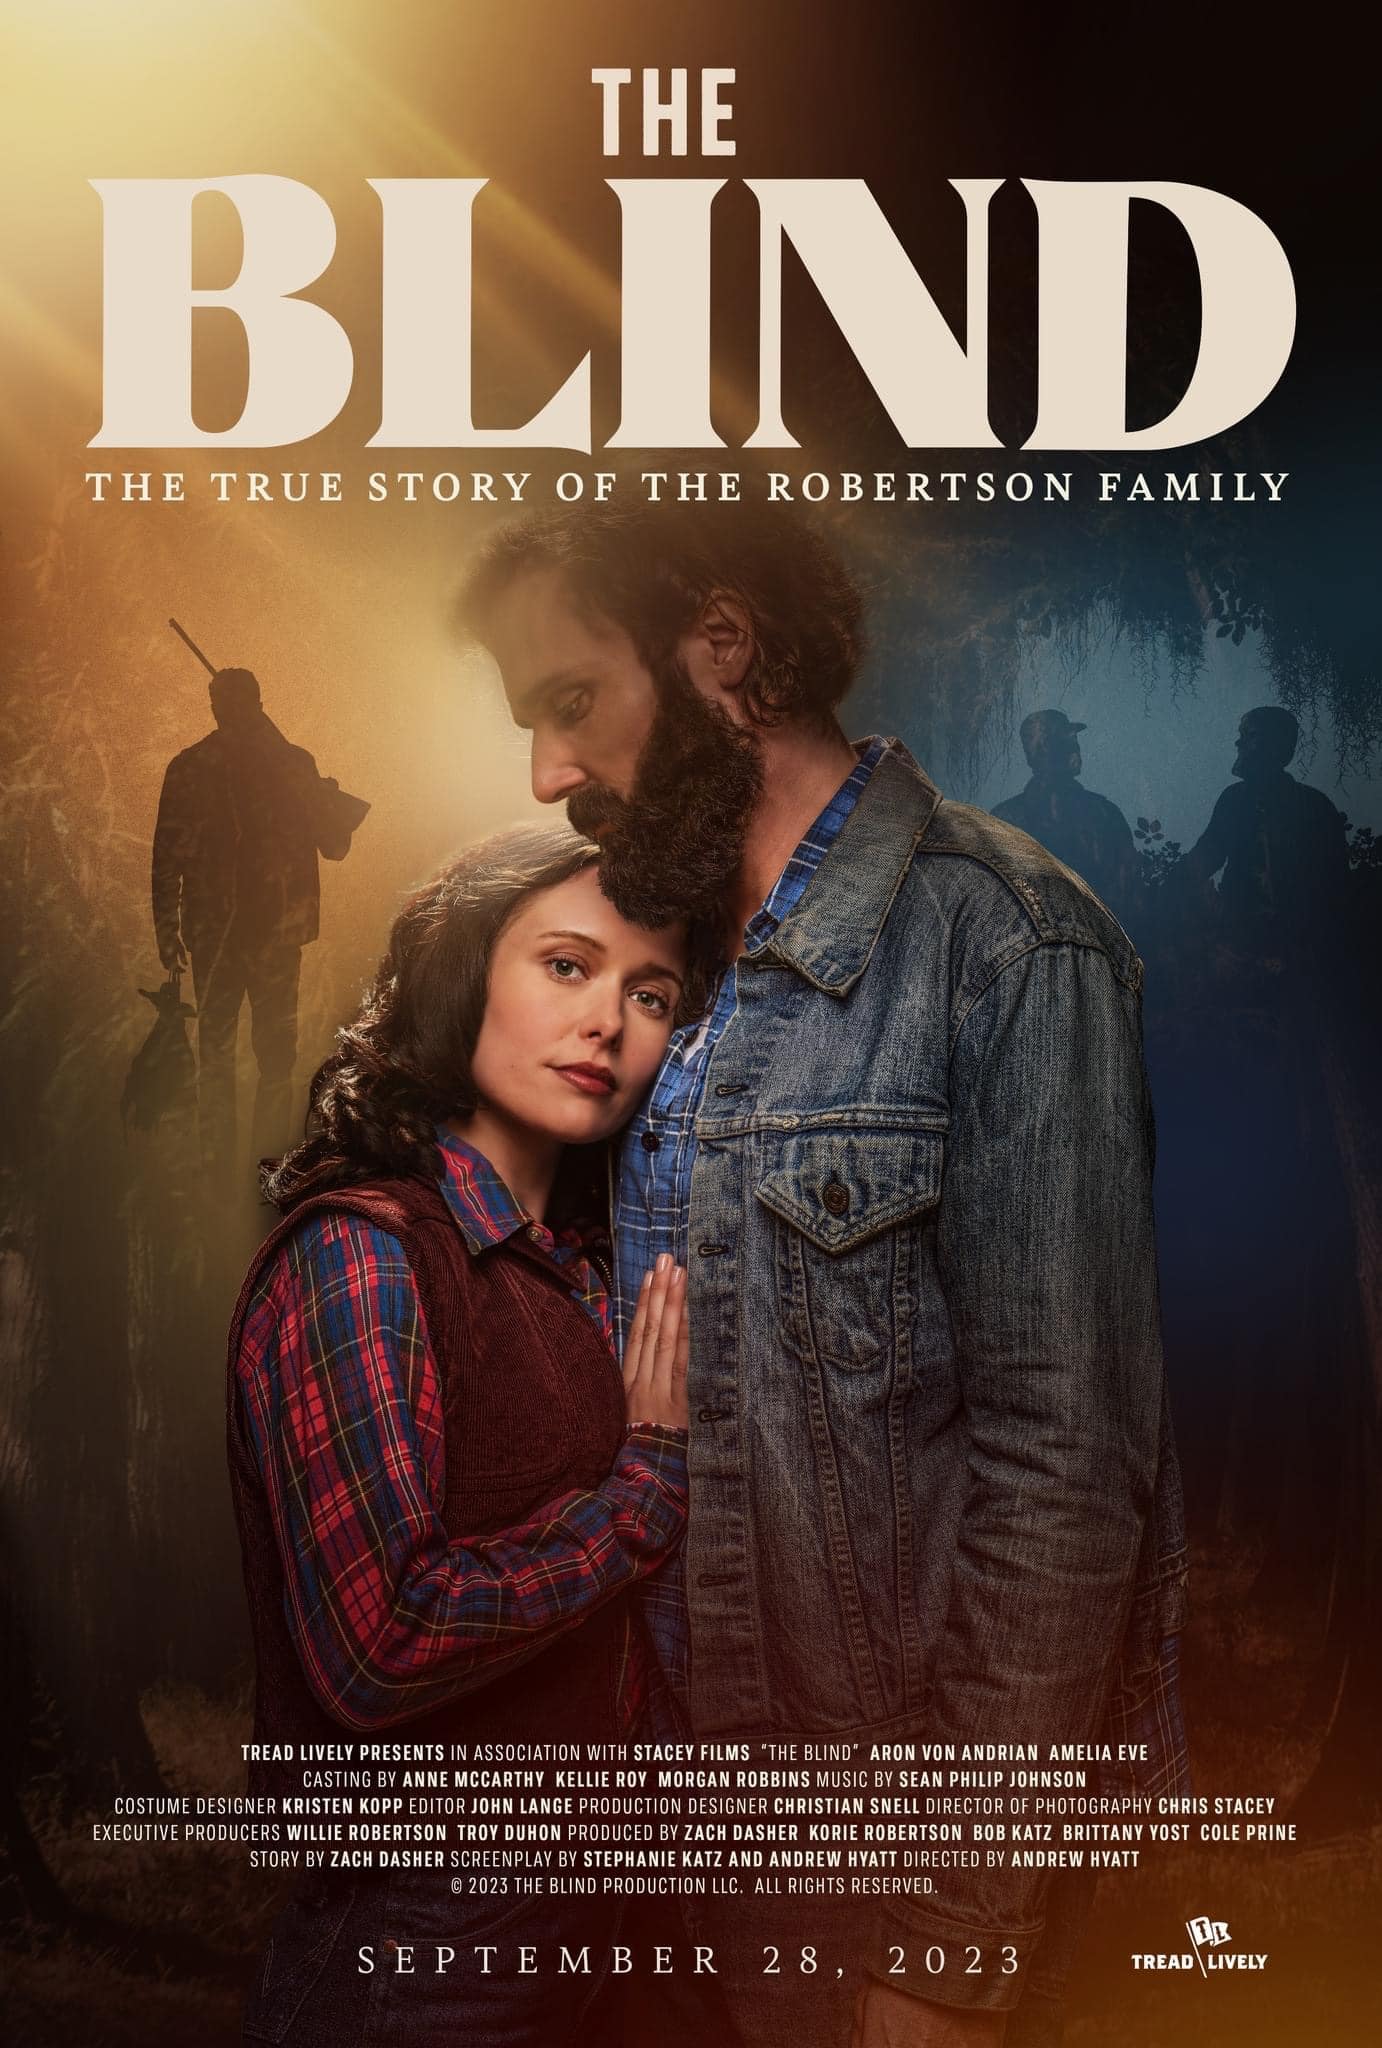 The Blind movie cover.